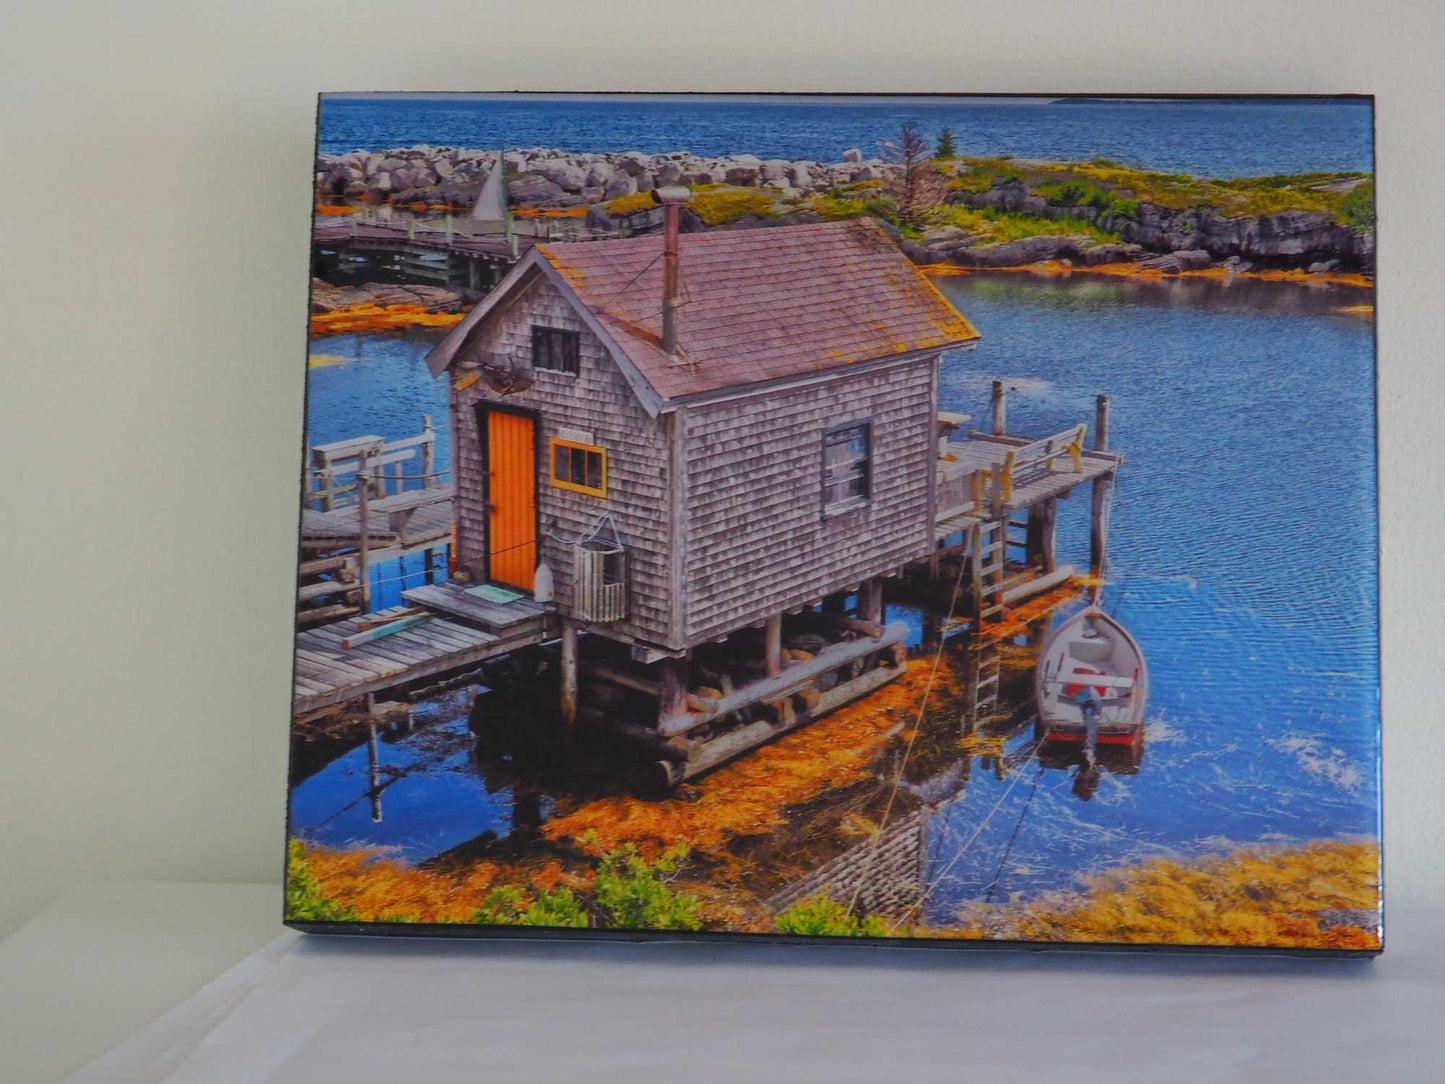 Spectacular view of Blue Rocks harbour featuring a picturesque fisherman's boathouse. Photography 8 x 10 inches covered with resin. Ready-to-hang in your favorite room.